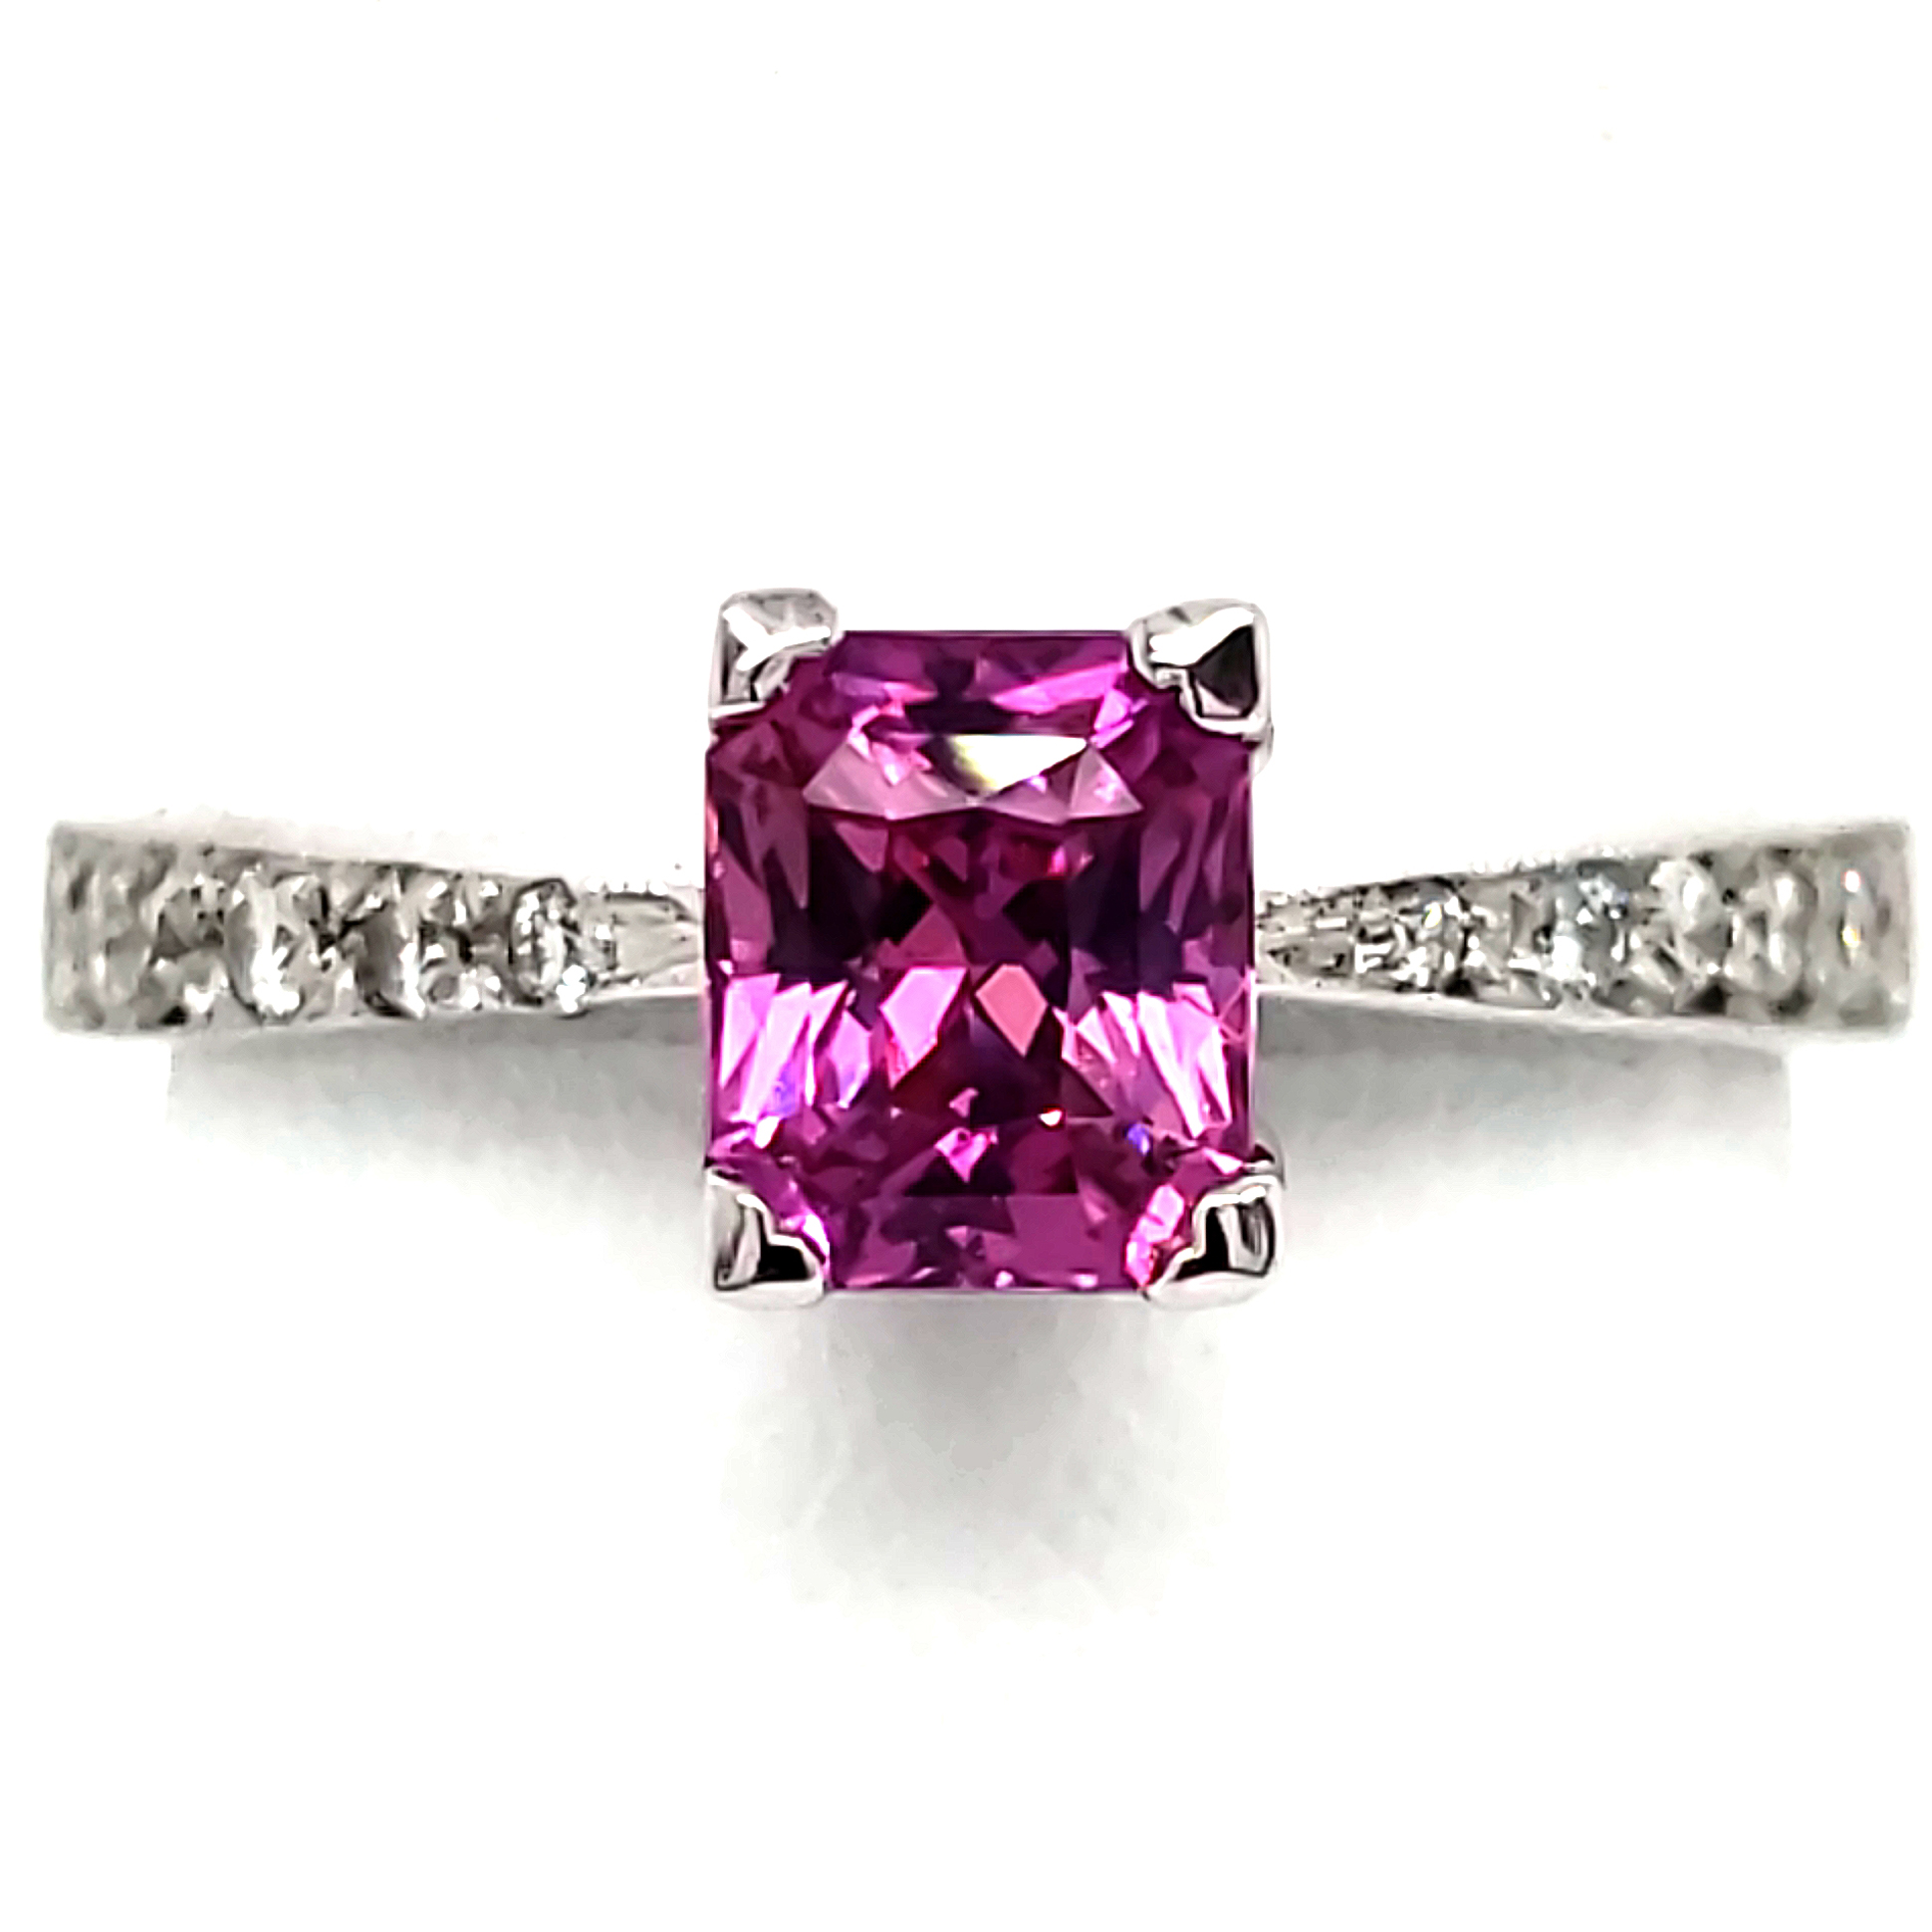 27.5 carat Really Hot Pink Topaz .925 Silver handcrafted Huge Cocktail Ring  s. 6 - model #24-wrz-23-25